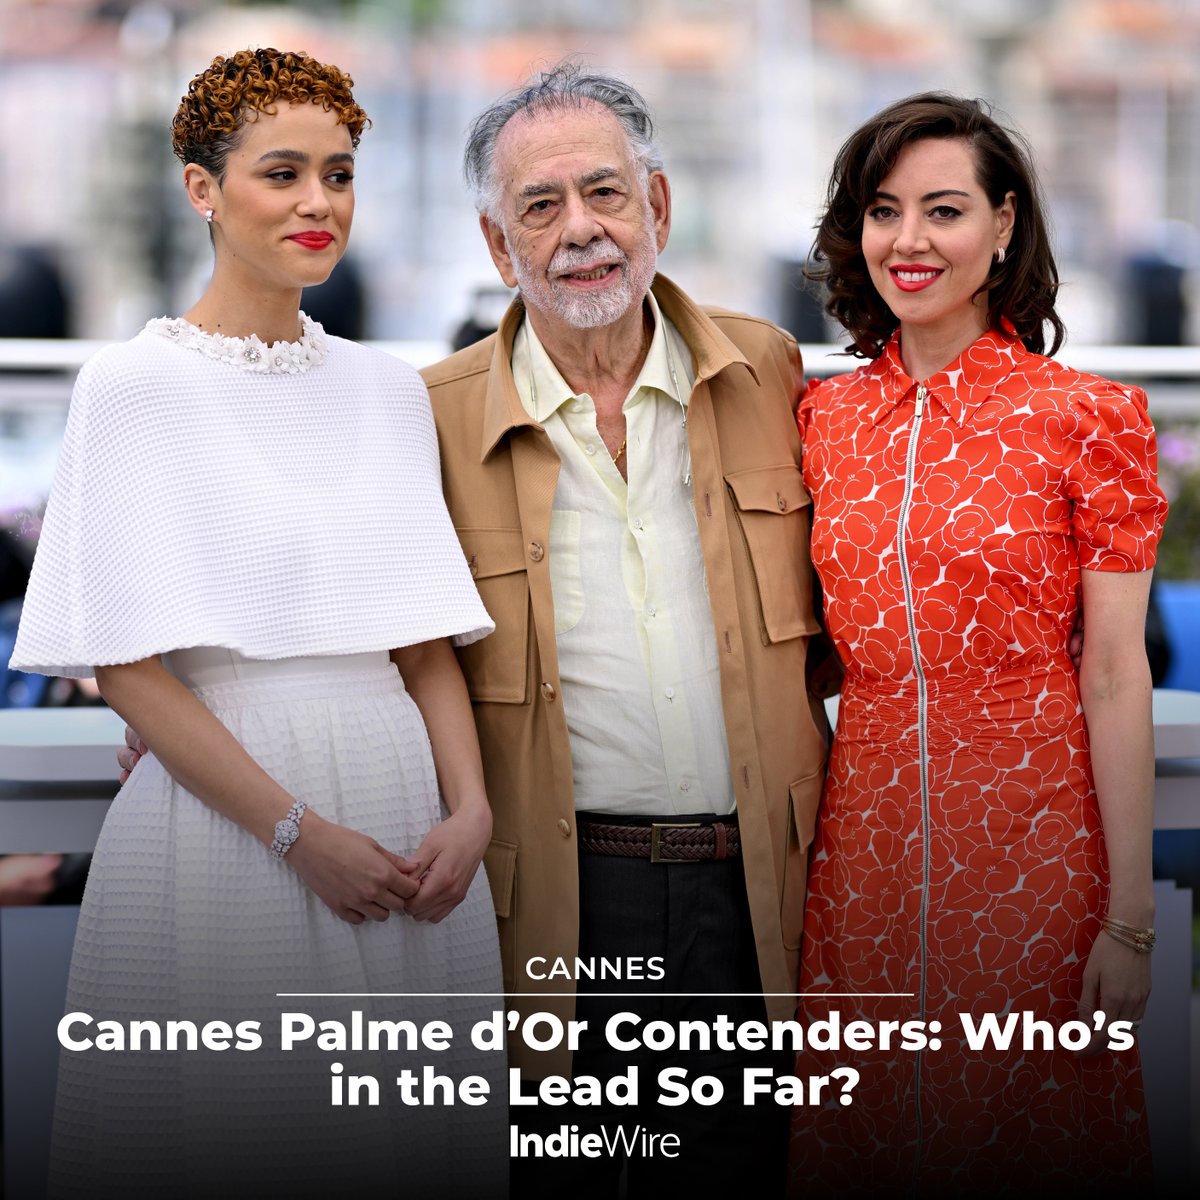 #Cannes: No frontrunner has emerged so far amid wildly divergent reactions to Francis Ford Coppola's #Megalopolis. See the current status of the Palme d'Or race: trib.al/nFYZx9w